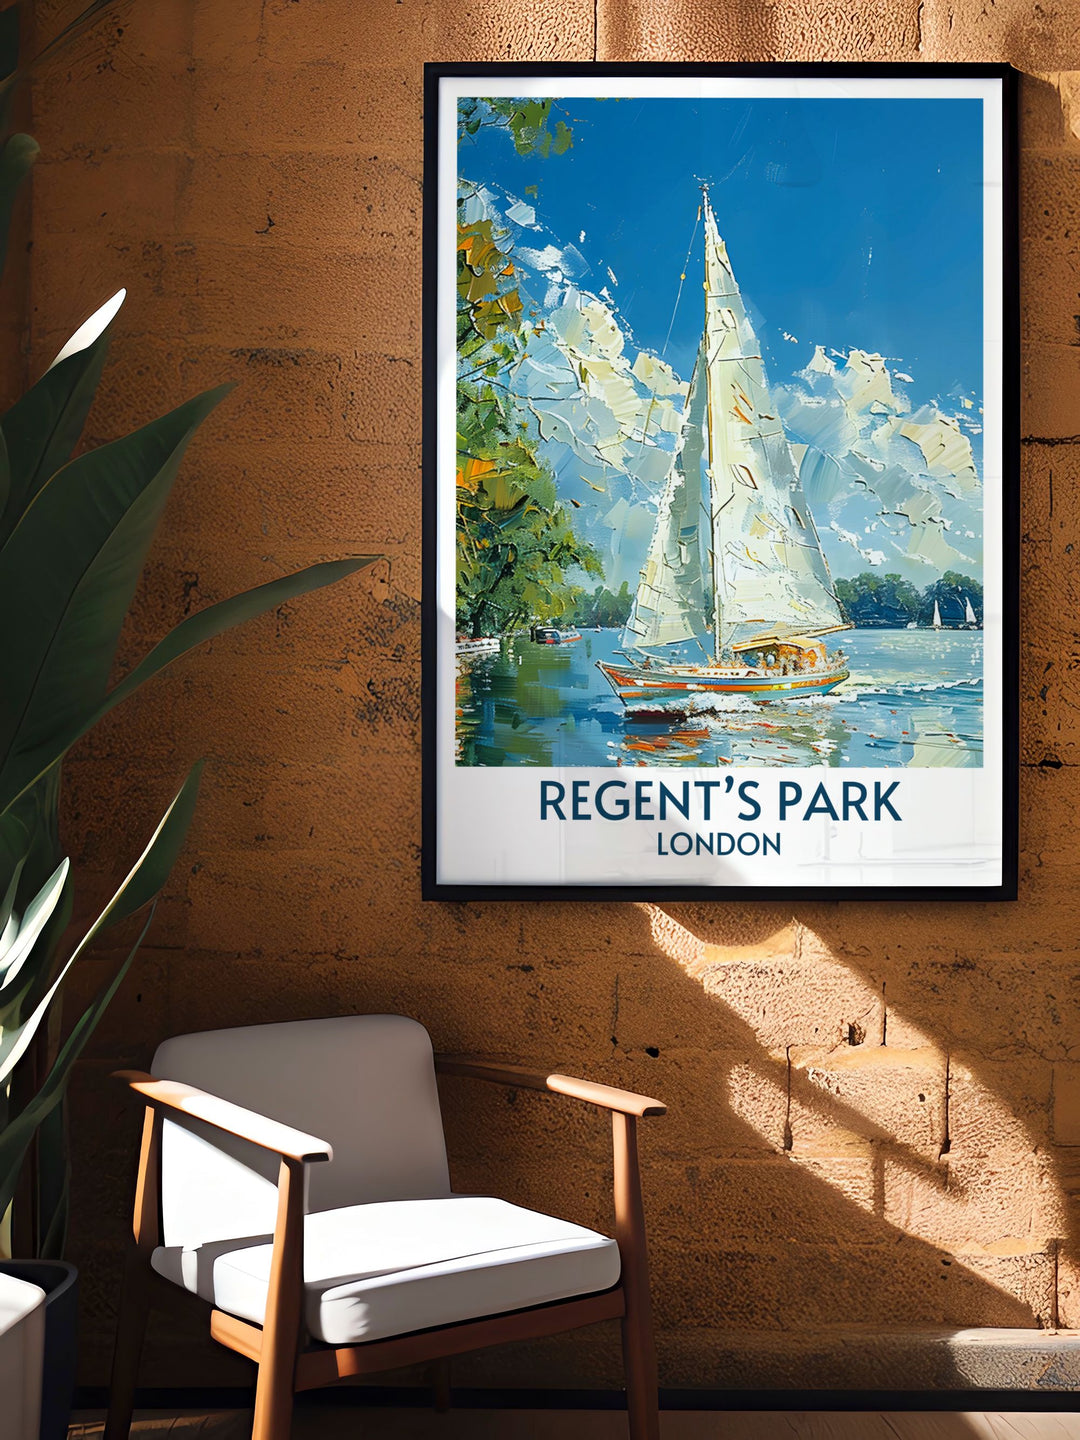 Beautiful Prints capturing the picturesque pathways and serene settings of Londons iconic Regents Park, ideal for home decor.